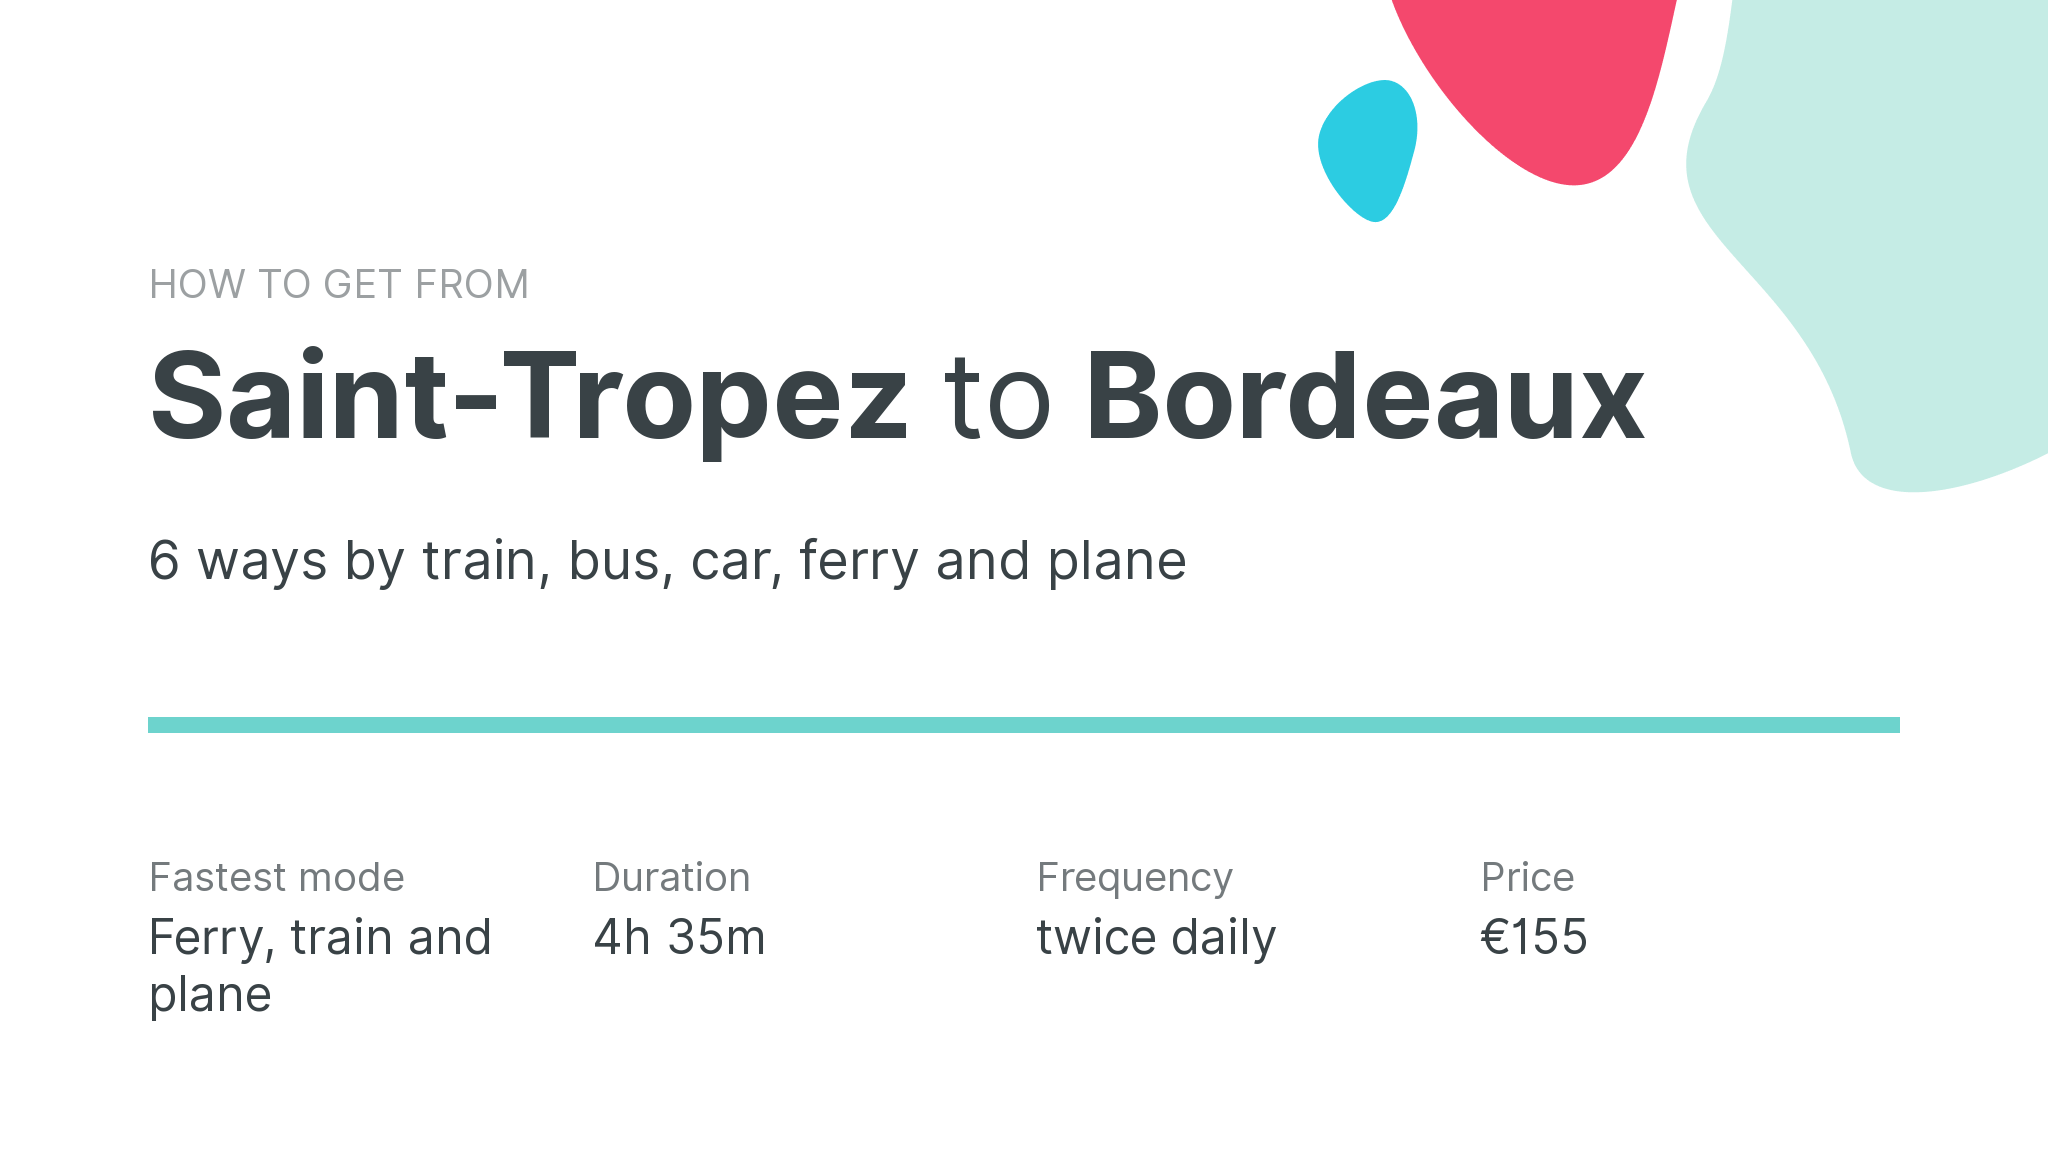 How do I get from Saint-Tropez to Bordeaux